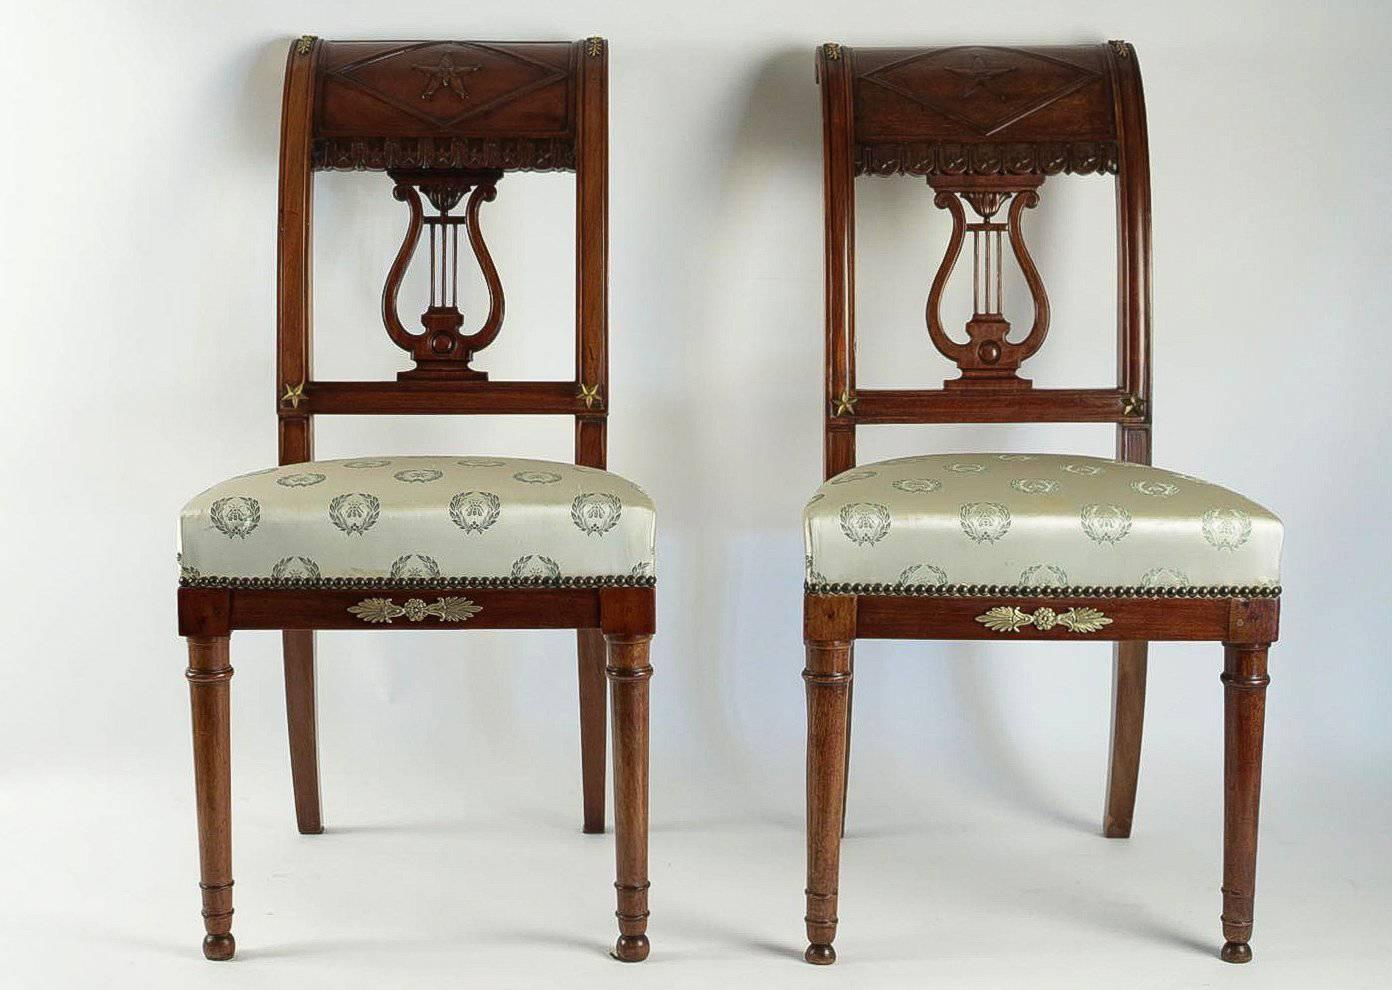 We are pleased to present you an interesting and unique set of four French Consulat period, solid mahogany chairs. Openwork back, Lyre decoration.

Magnificent French work, early-19th century, circa 1803, for the serious collector of French